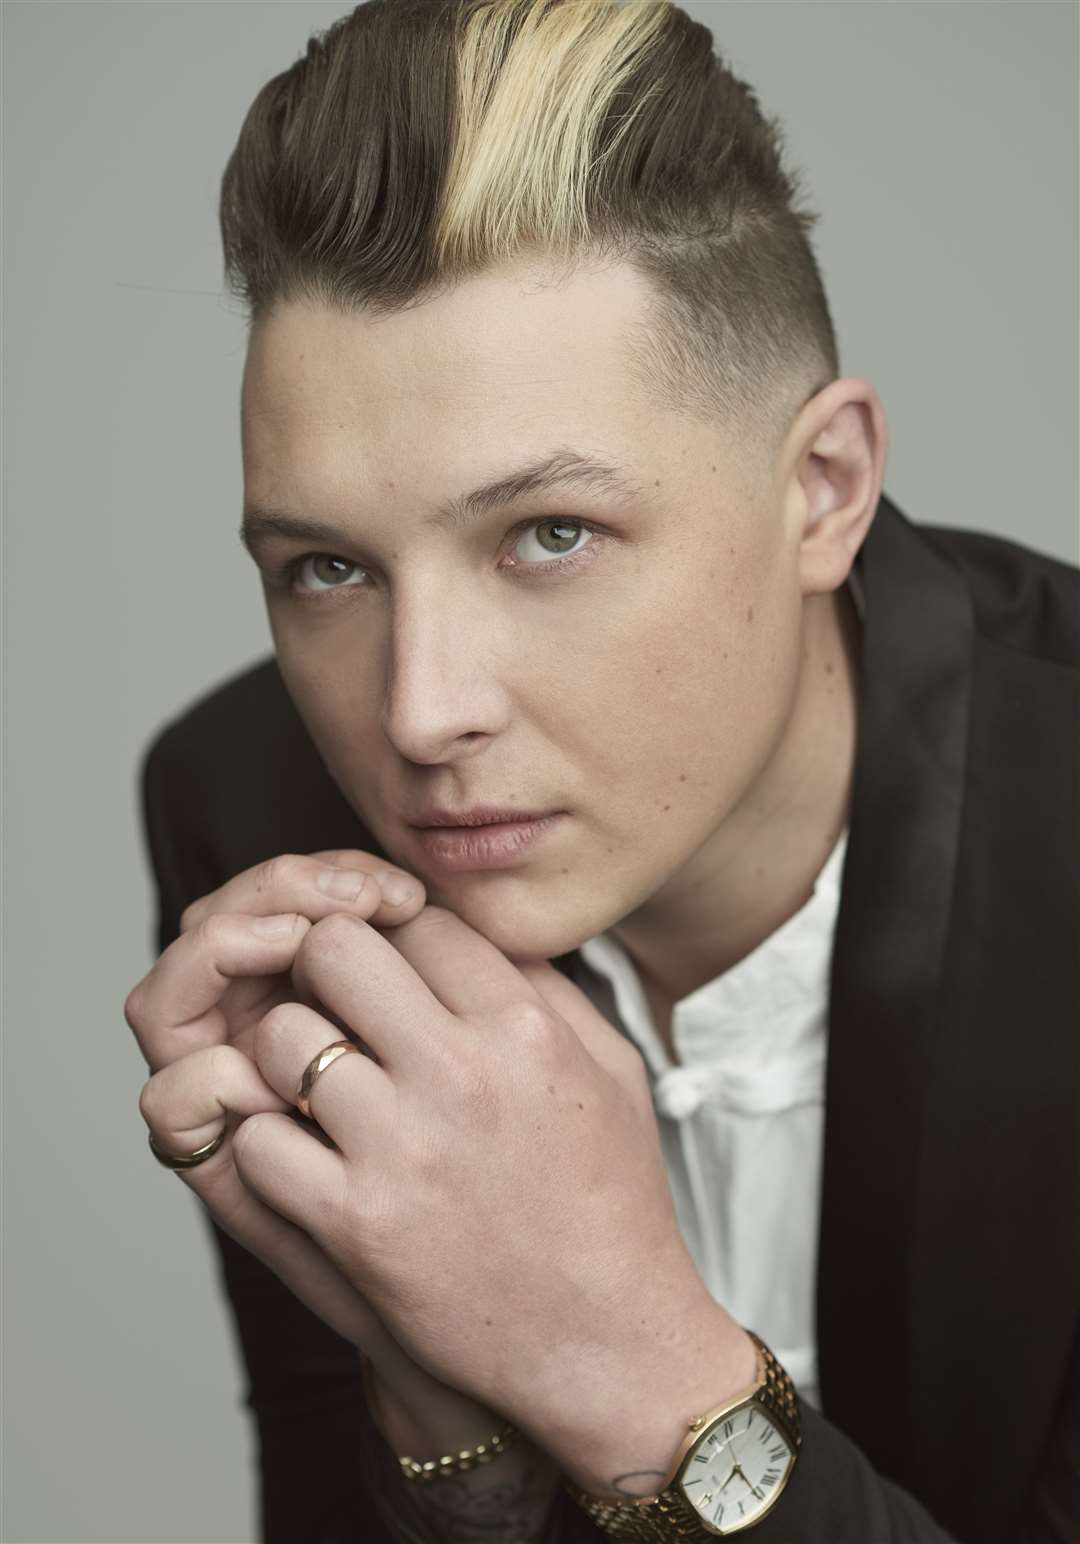 John Newman will play in Margate Picture: Chuff Media